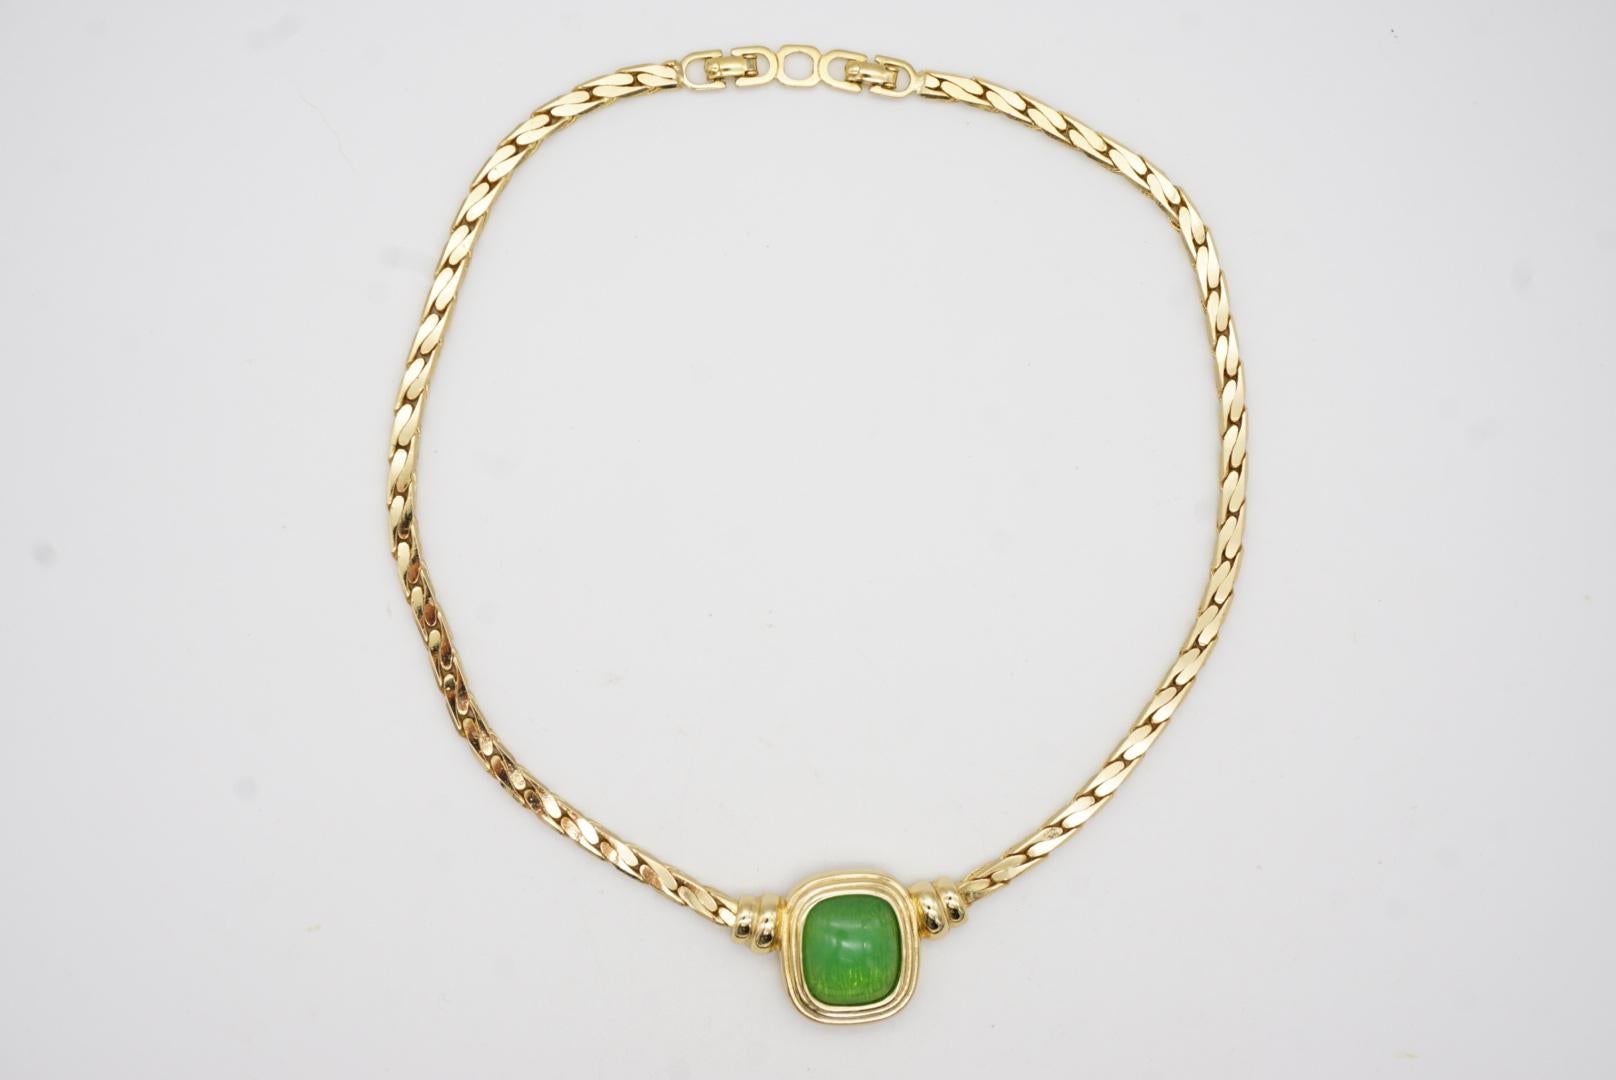 Christian Dior Vintage 1980s Emerald Green Rectangle Cabochon Pendant Necklace For Sale 2